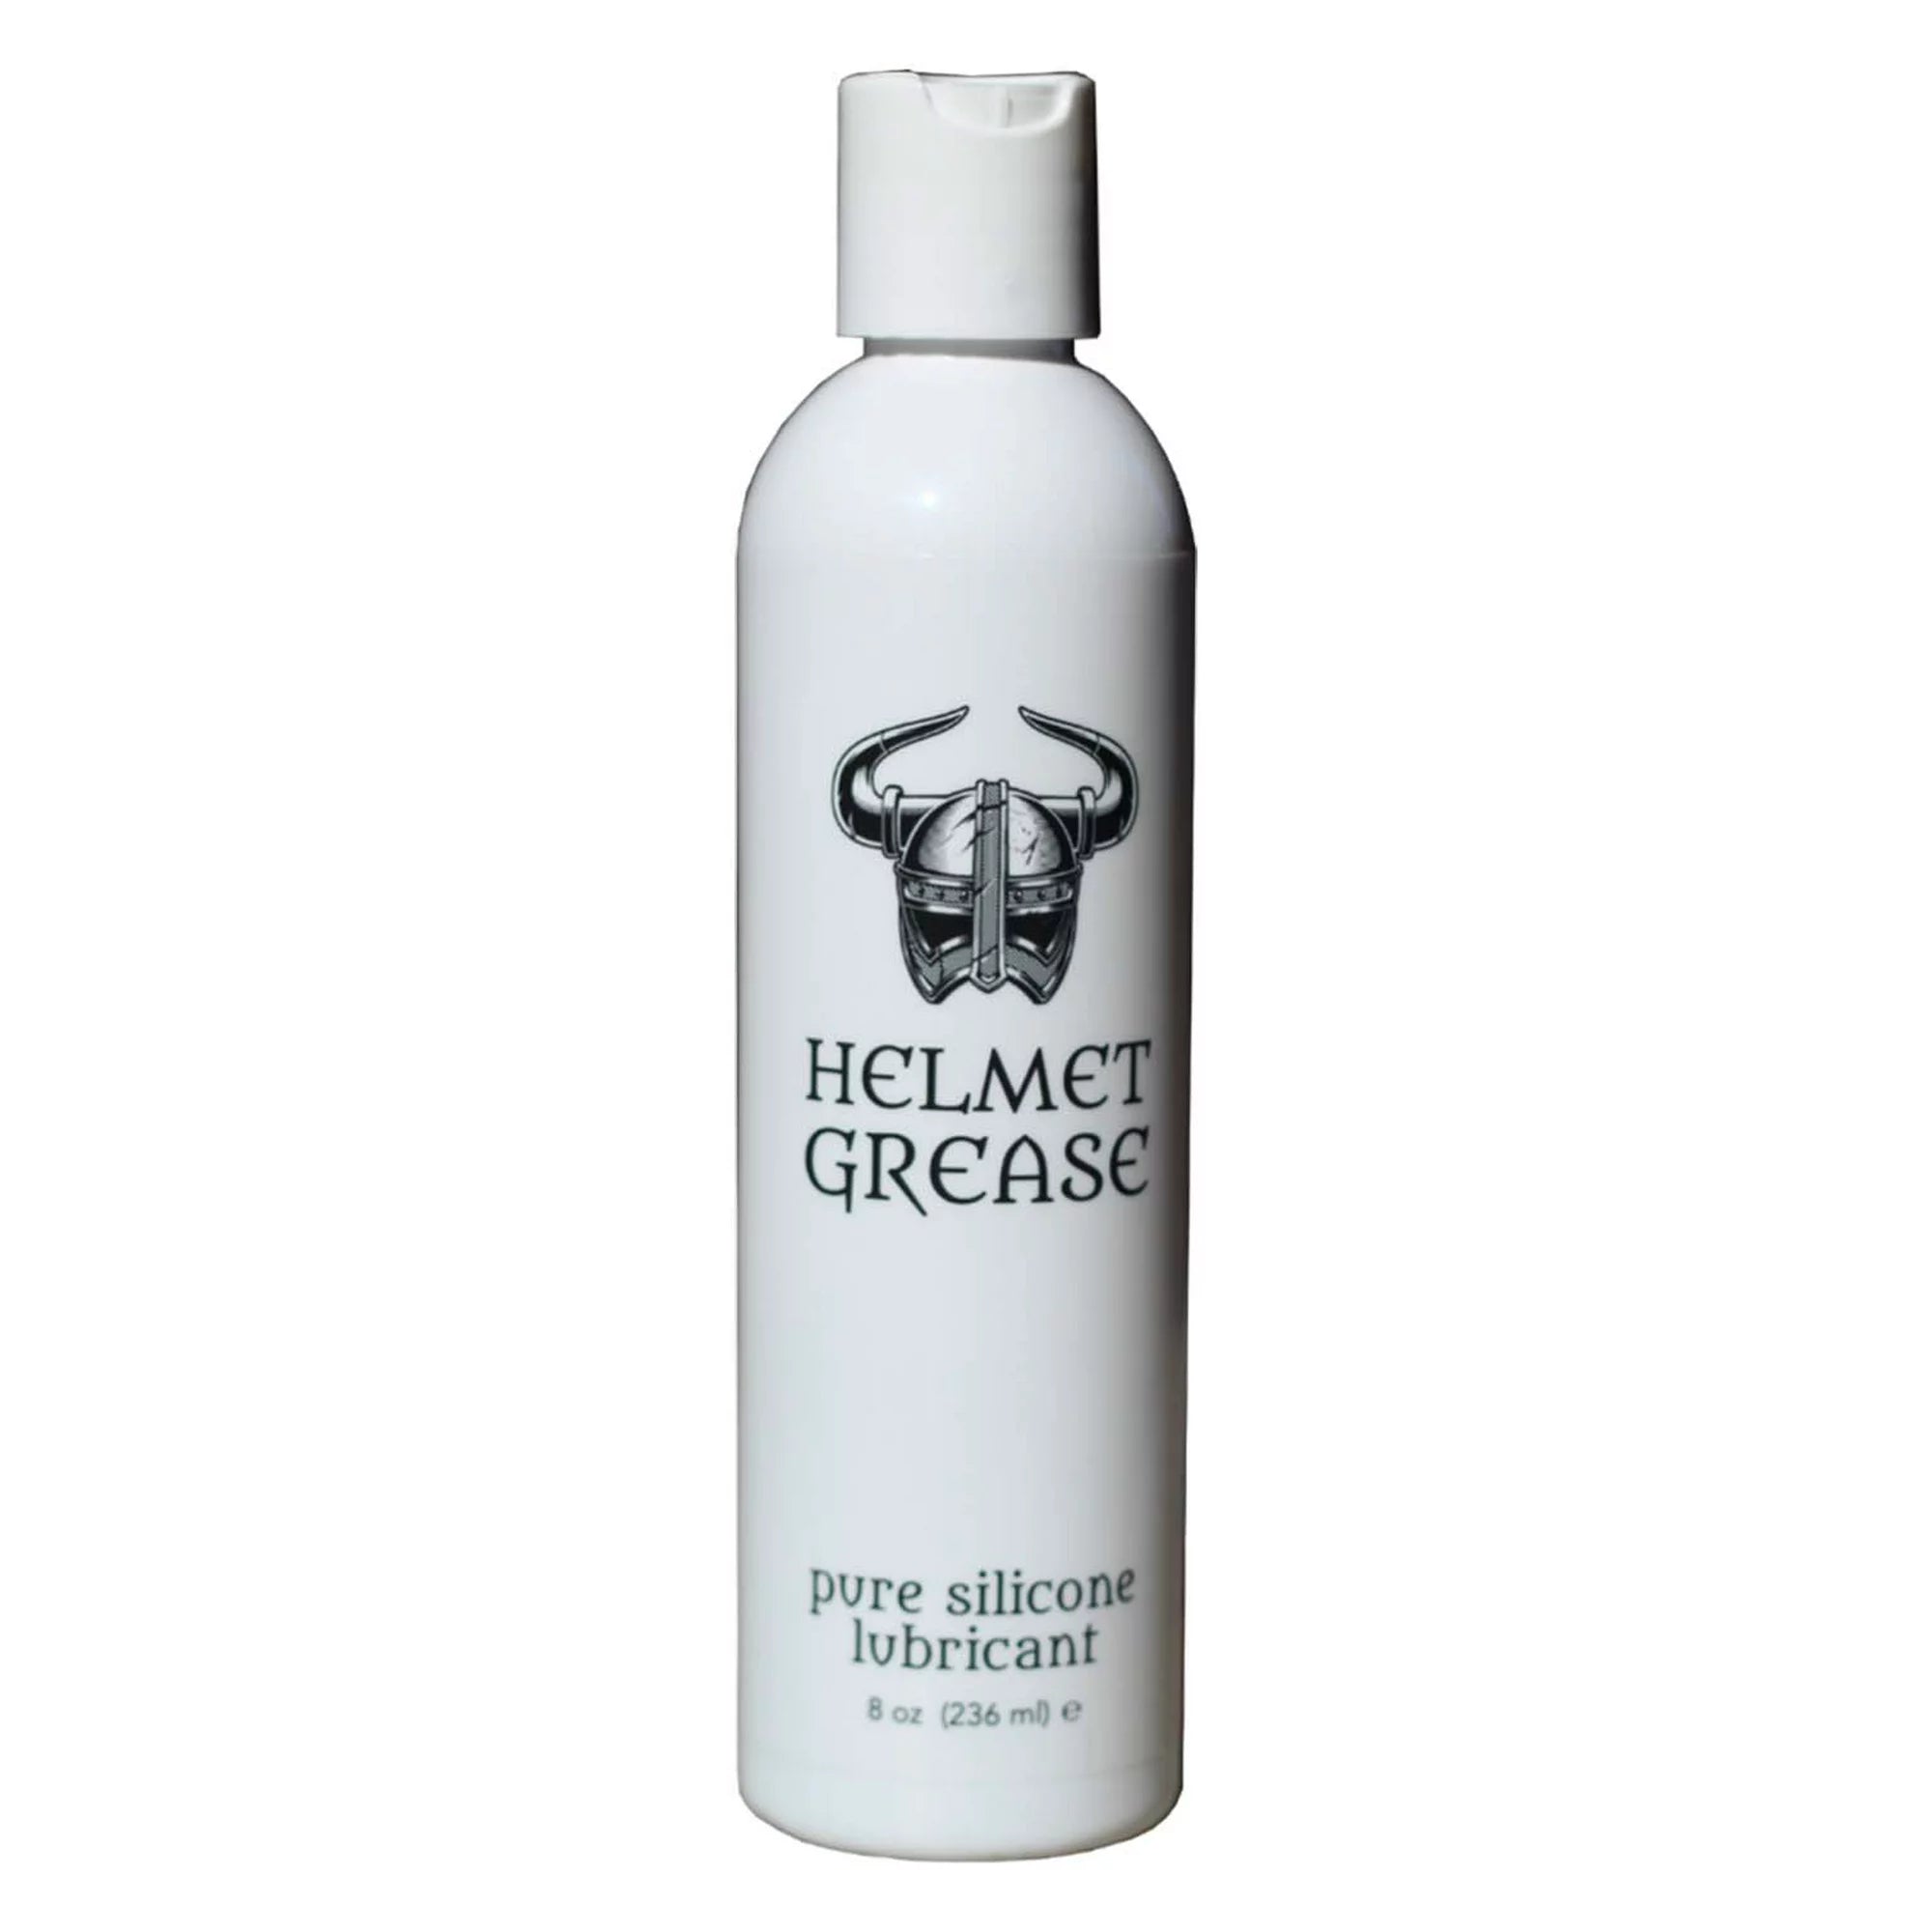 Helmet Grease Pure Silicone Lubrication 8 oz (236 mL) - CheapLubes.com